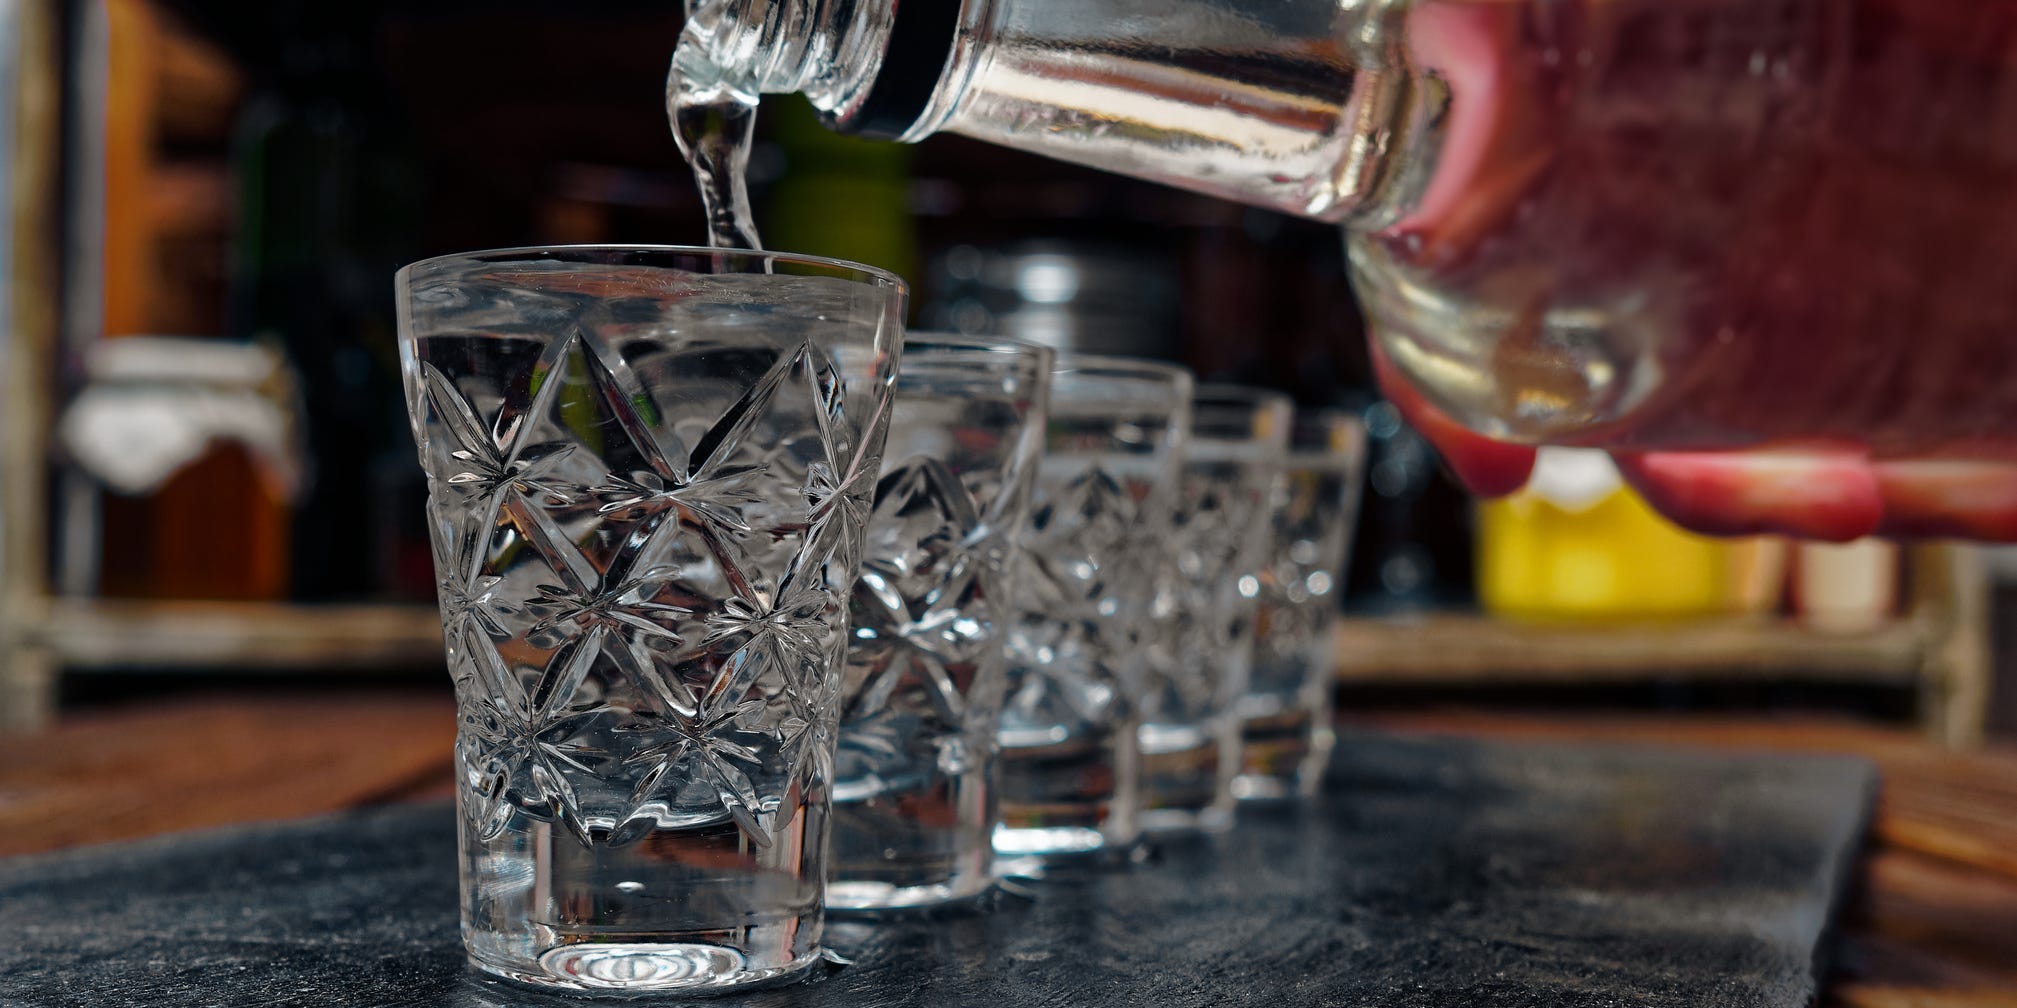 A bottle of vodka being poured into a line of shot glasses